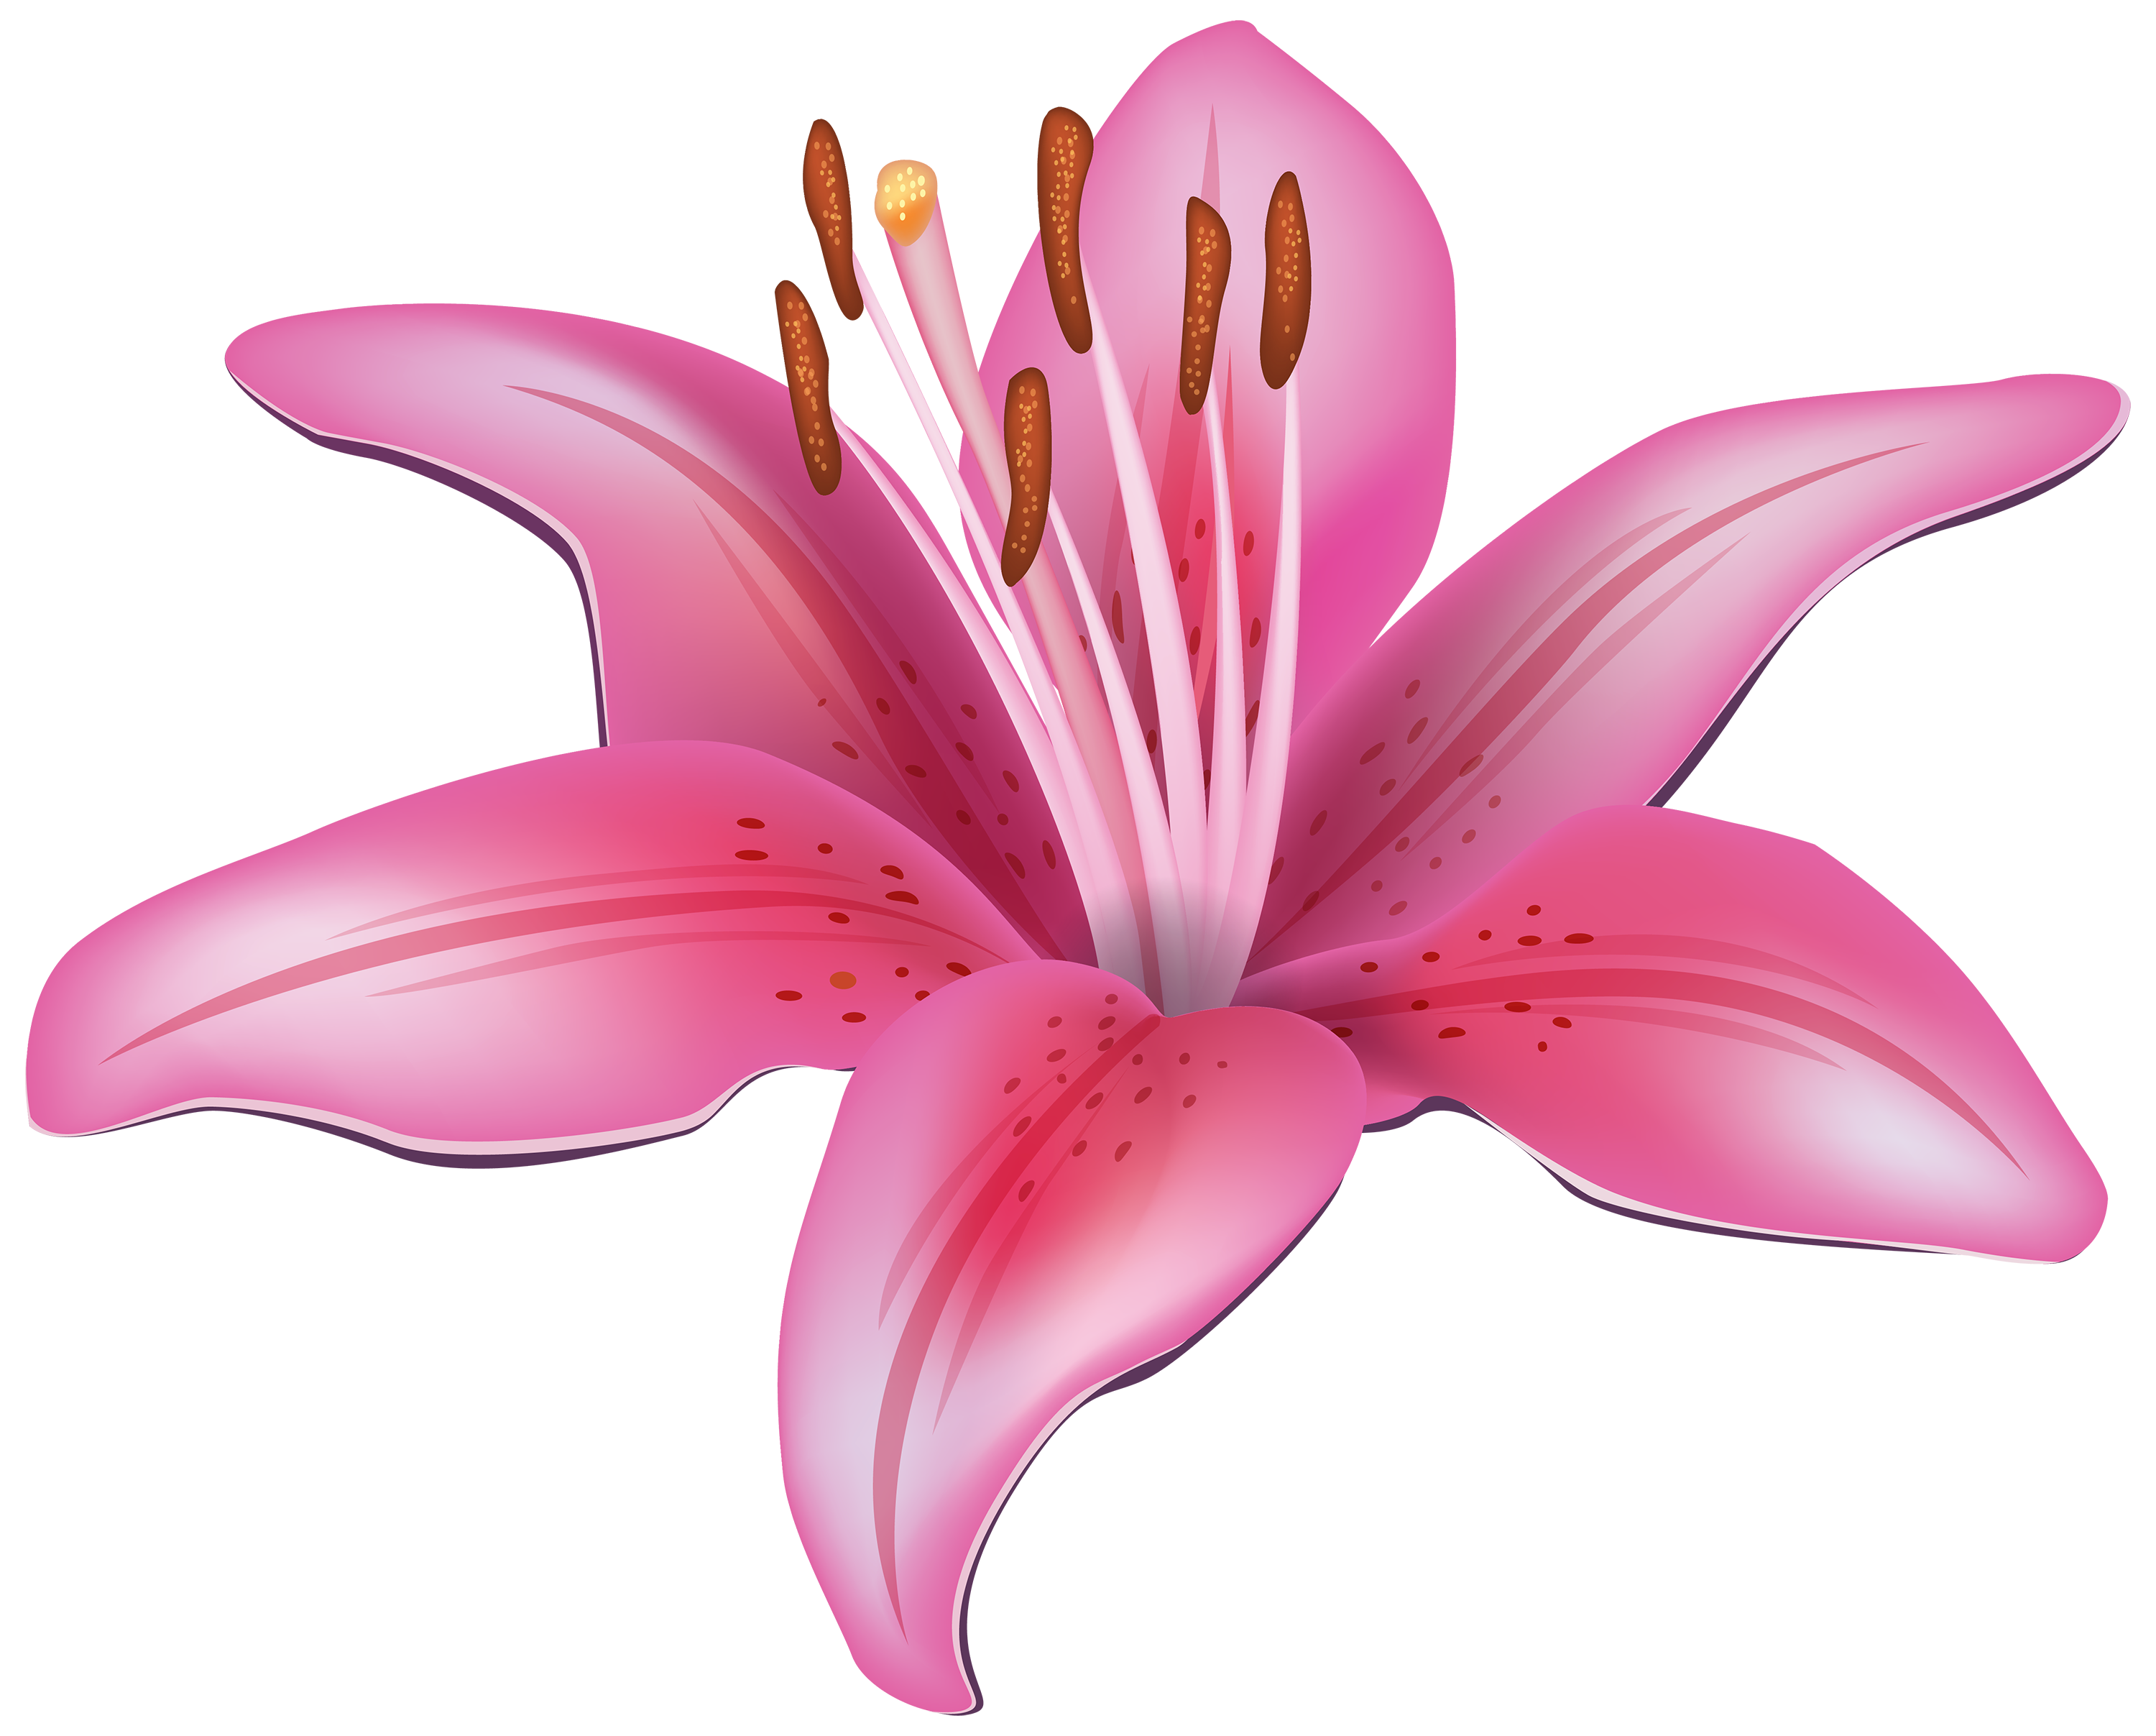 Lily image free clip art of easter lilies 2 image